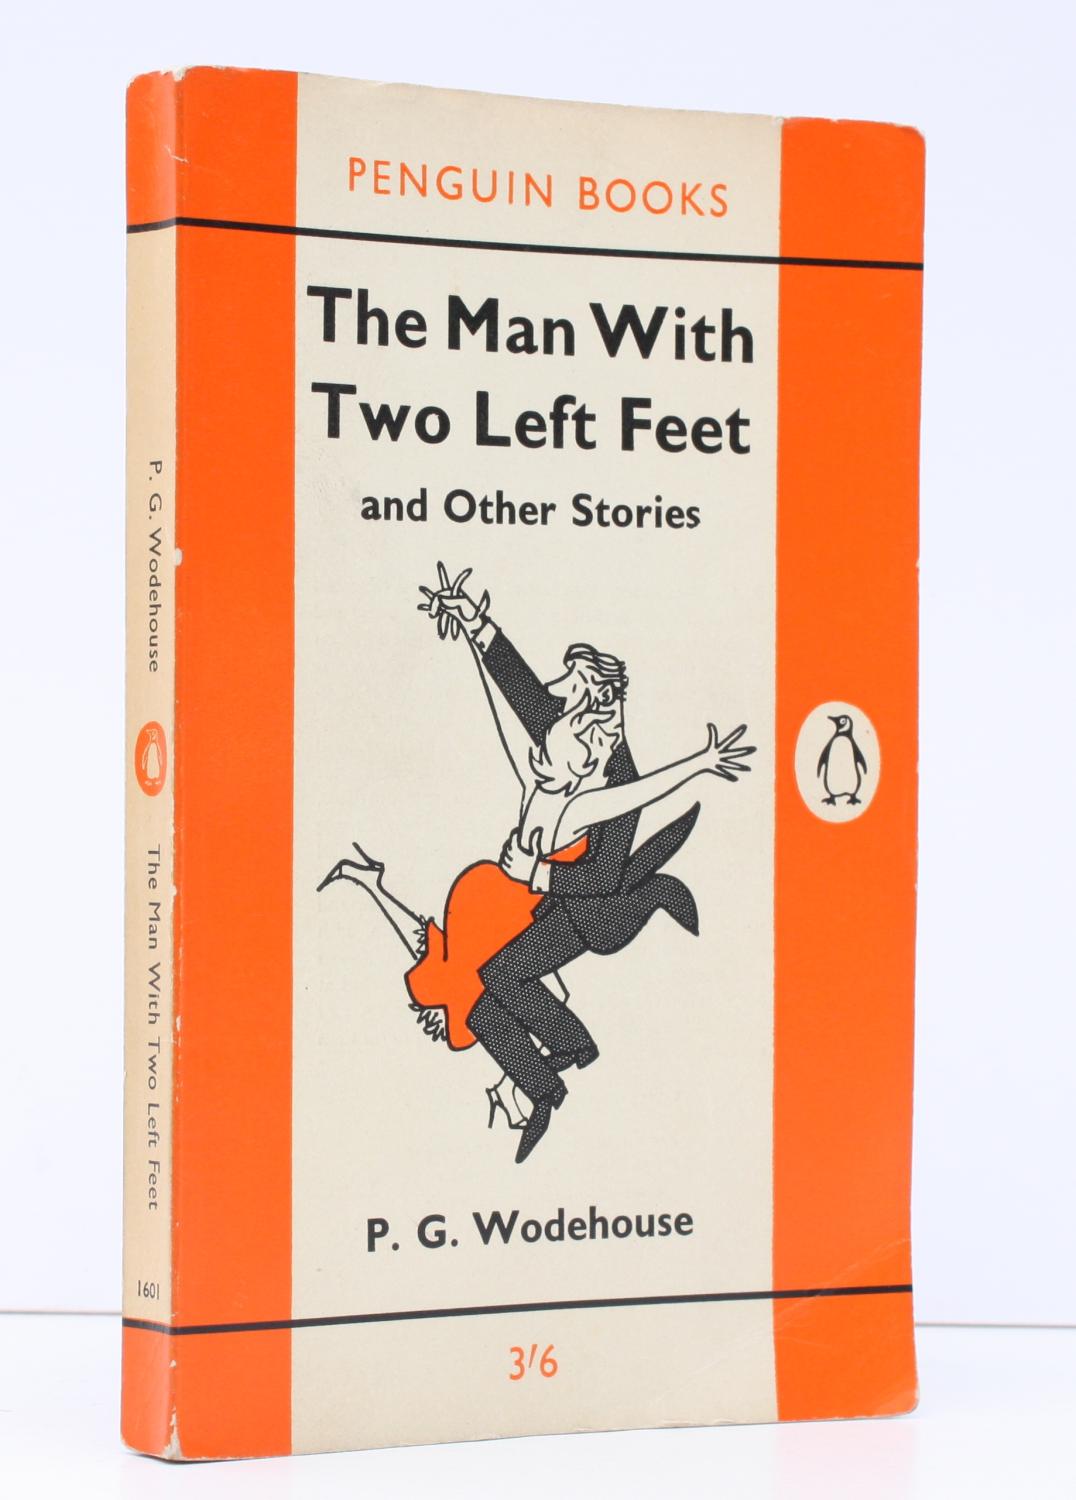 The Man with Two Left Feet and other Stories. FIRST APPEARANCE IN